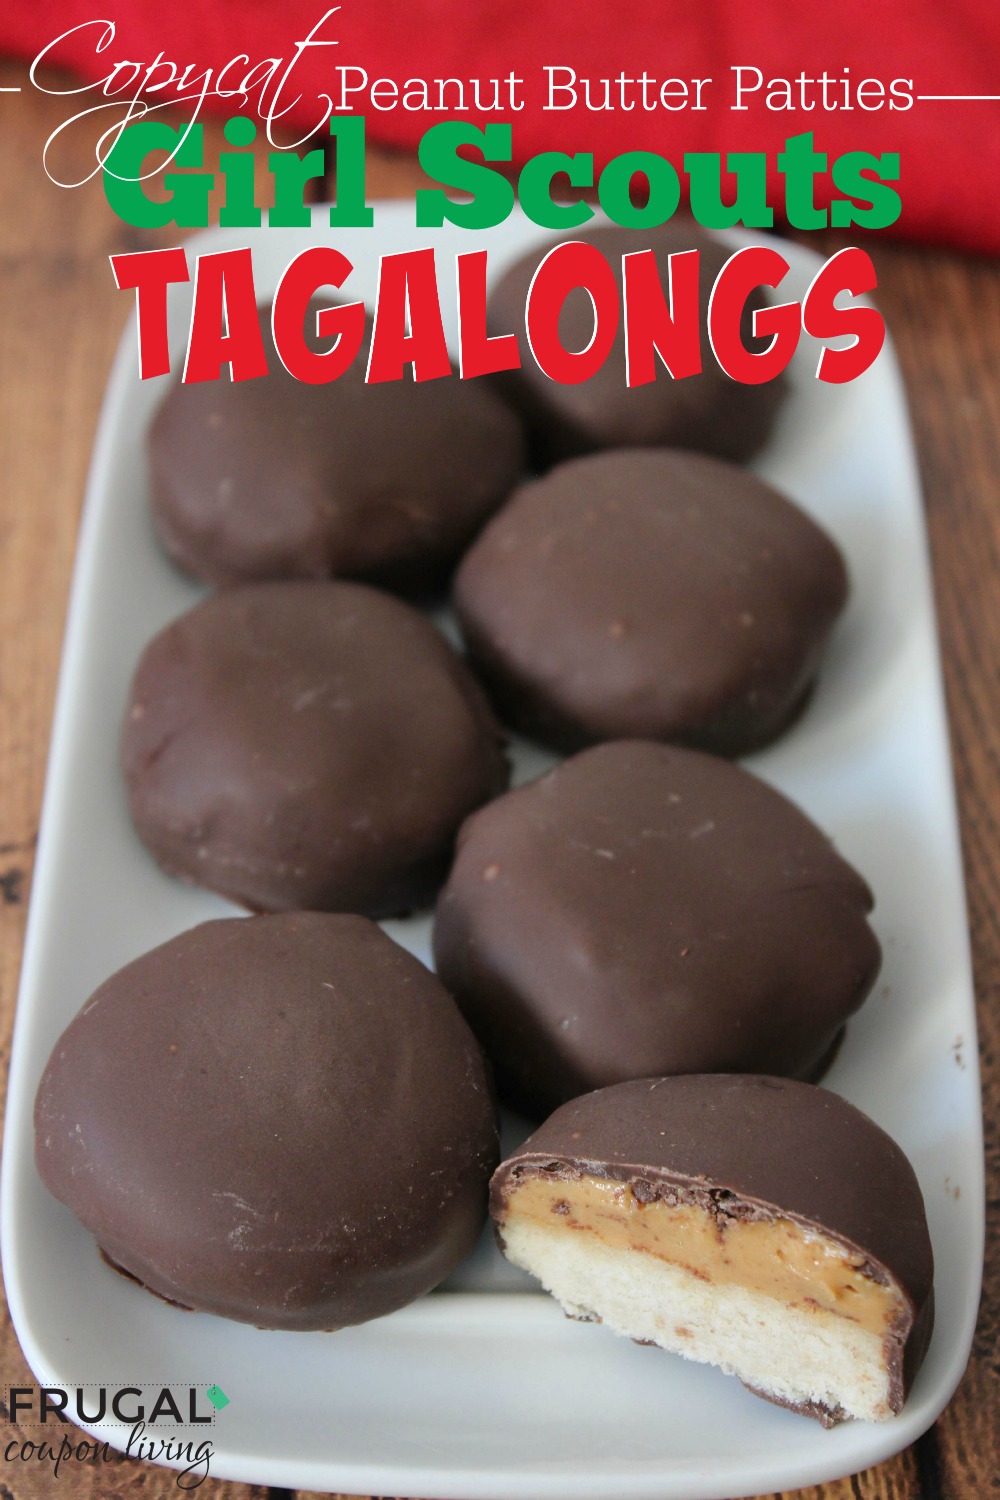 https://www.frugalcouponliving.com/copycat-girl-scouts-tagalong-cookies-recipe/copycat-girl-scout-tagalongs-frugal-coupon-living-webisite/